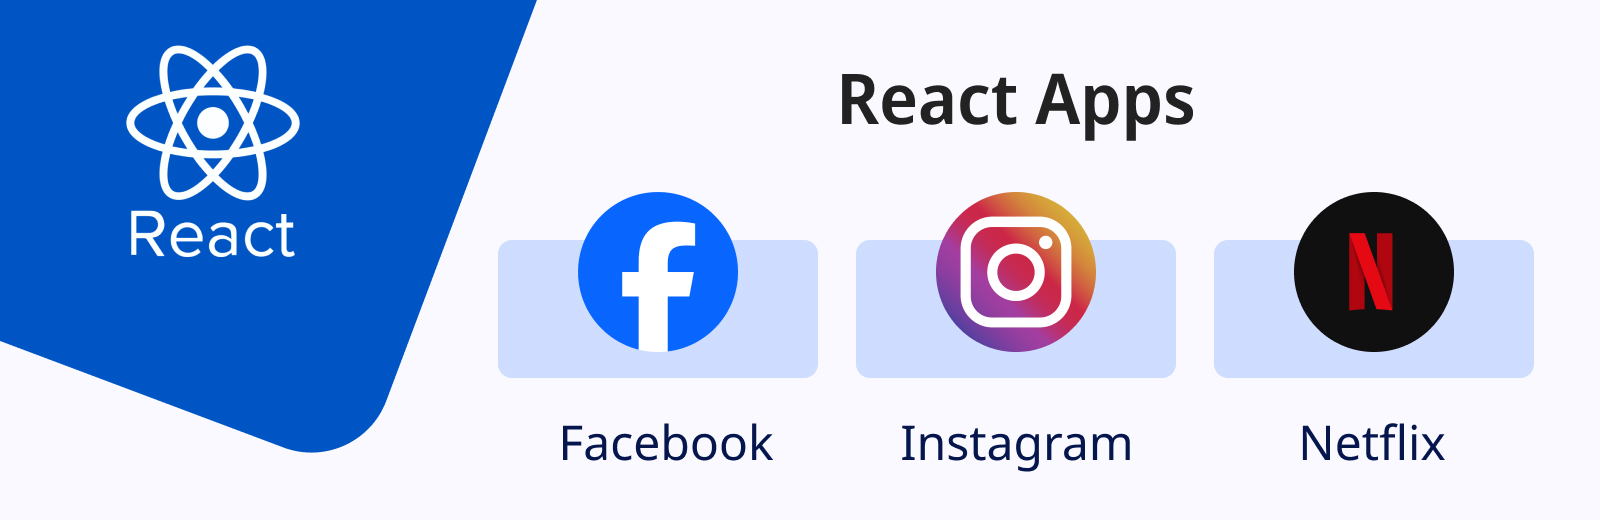 React Apps